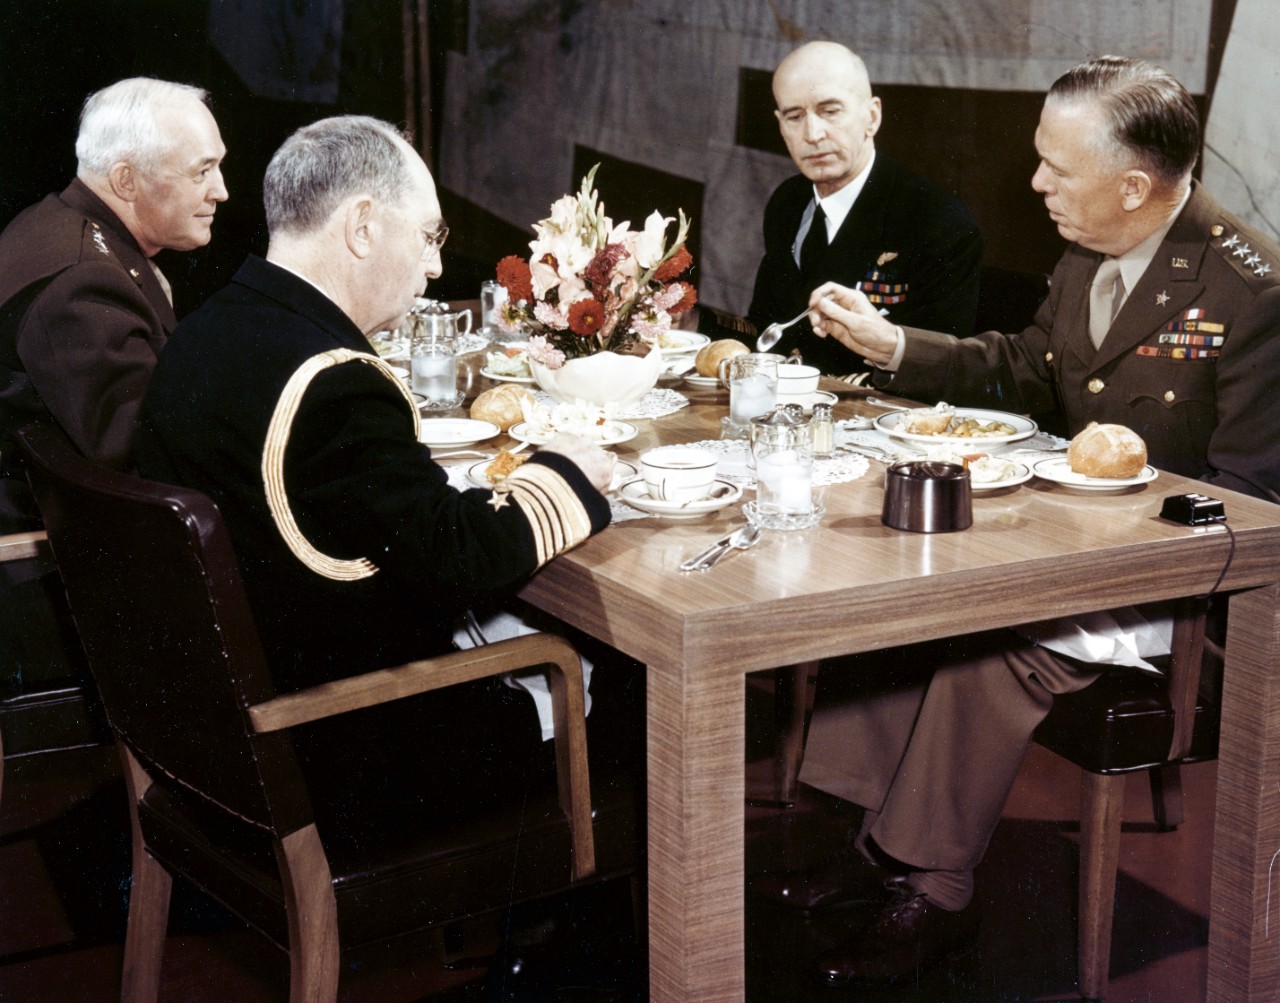 A luncheon meeting of the Joint Chiefs of Staff, Washington DC, circa 1943. Left to Right: General Henry H Arnold, Admiral William D Leahy, Admiral Ernest J King, and General George C Marshall.